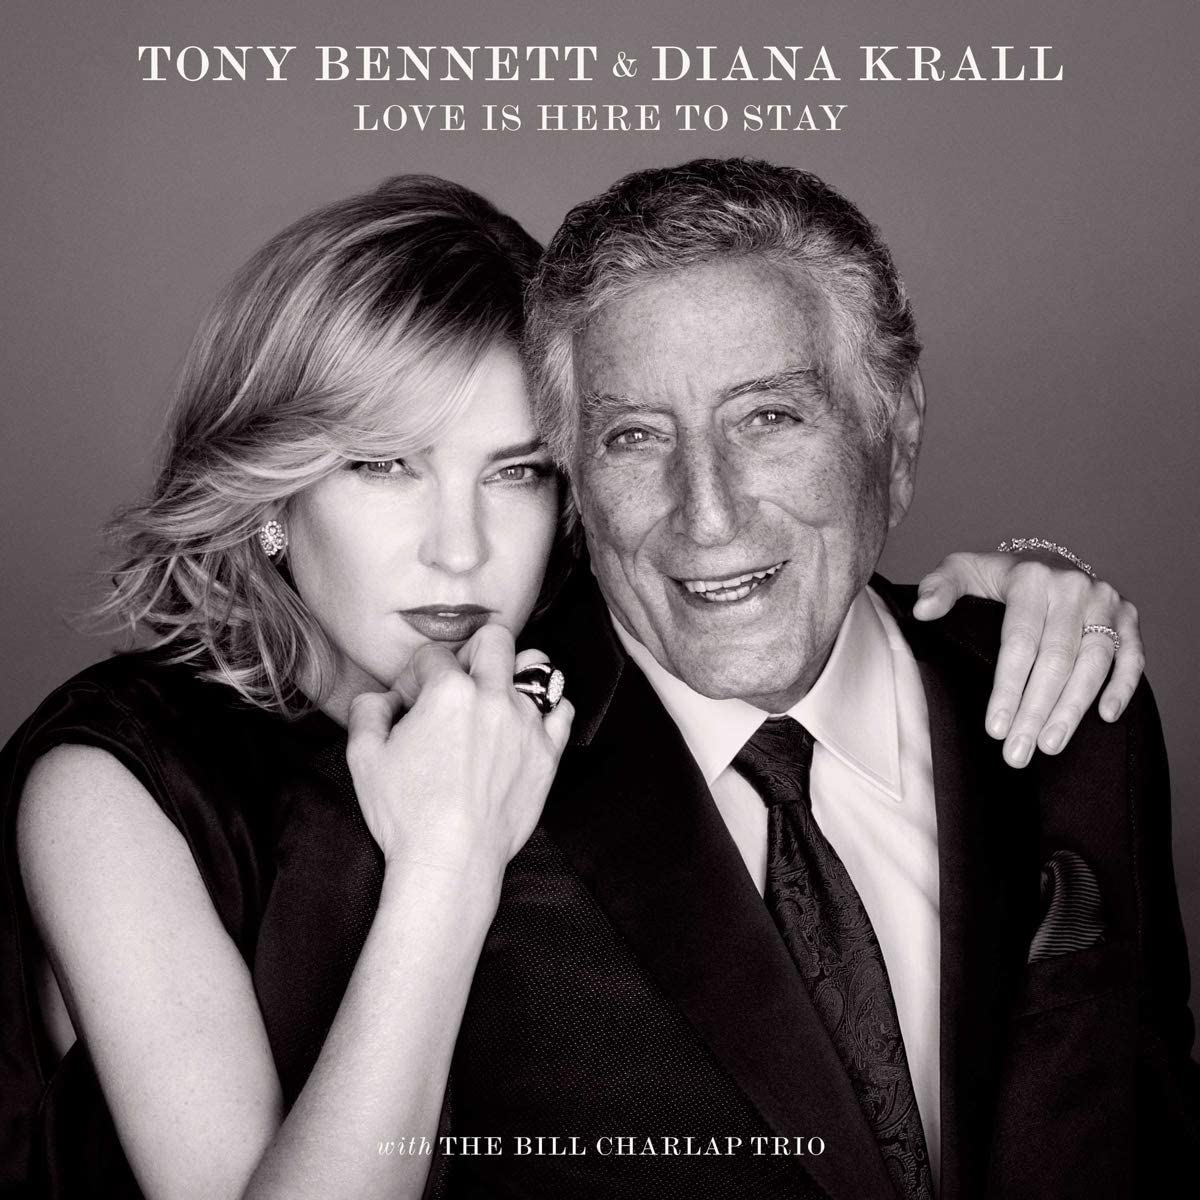 Tony Bennett & Diana Krall - Love Is Here To Stay - CD